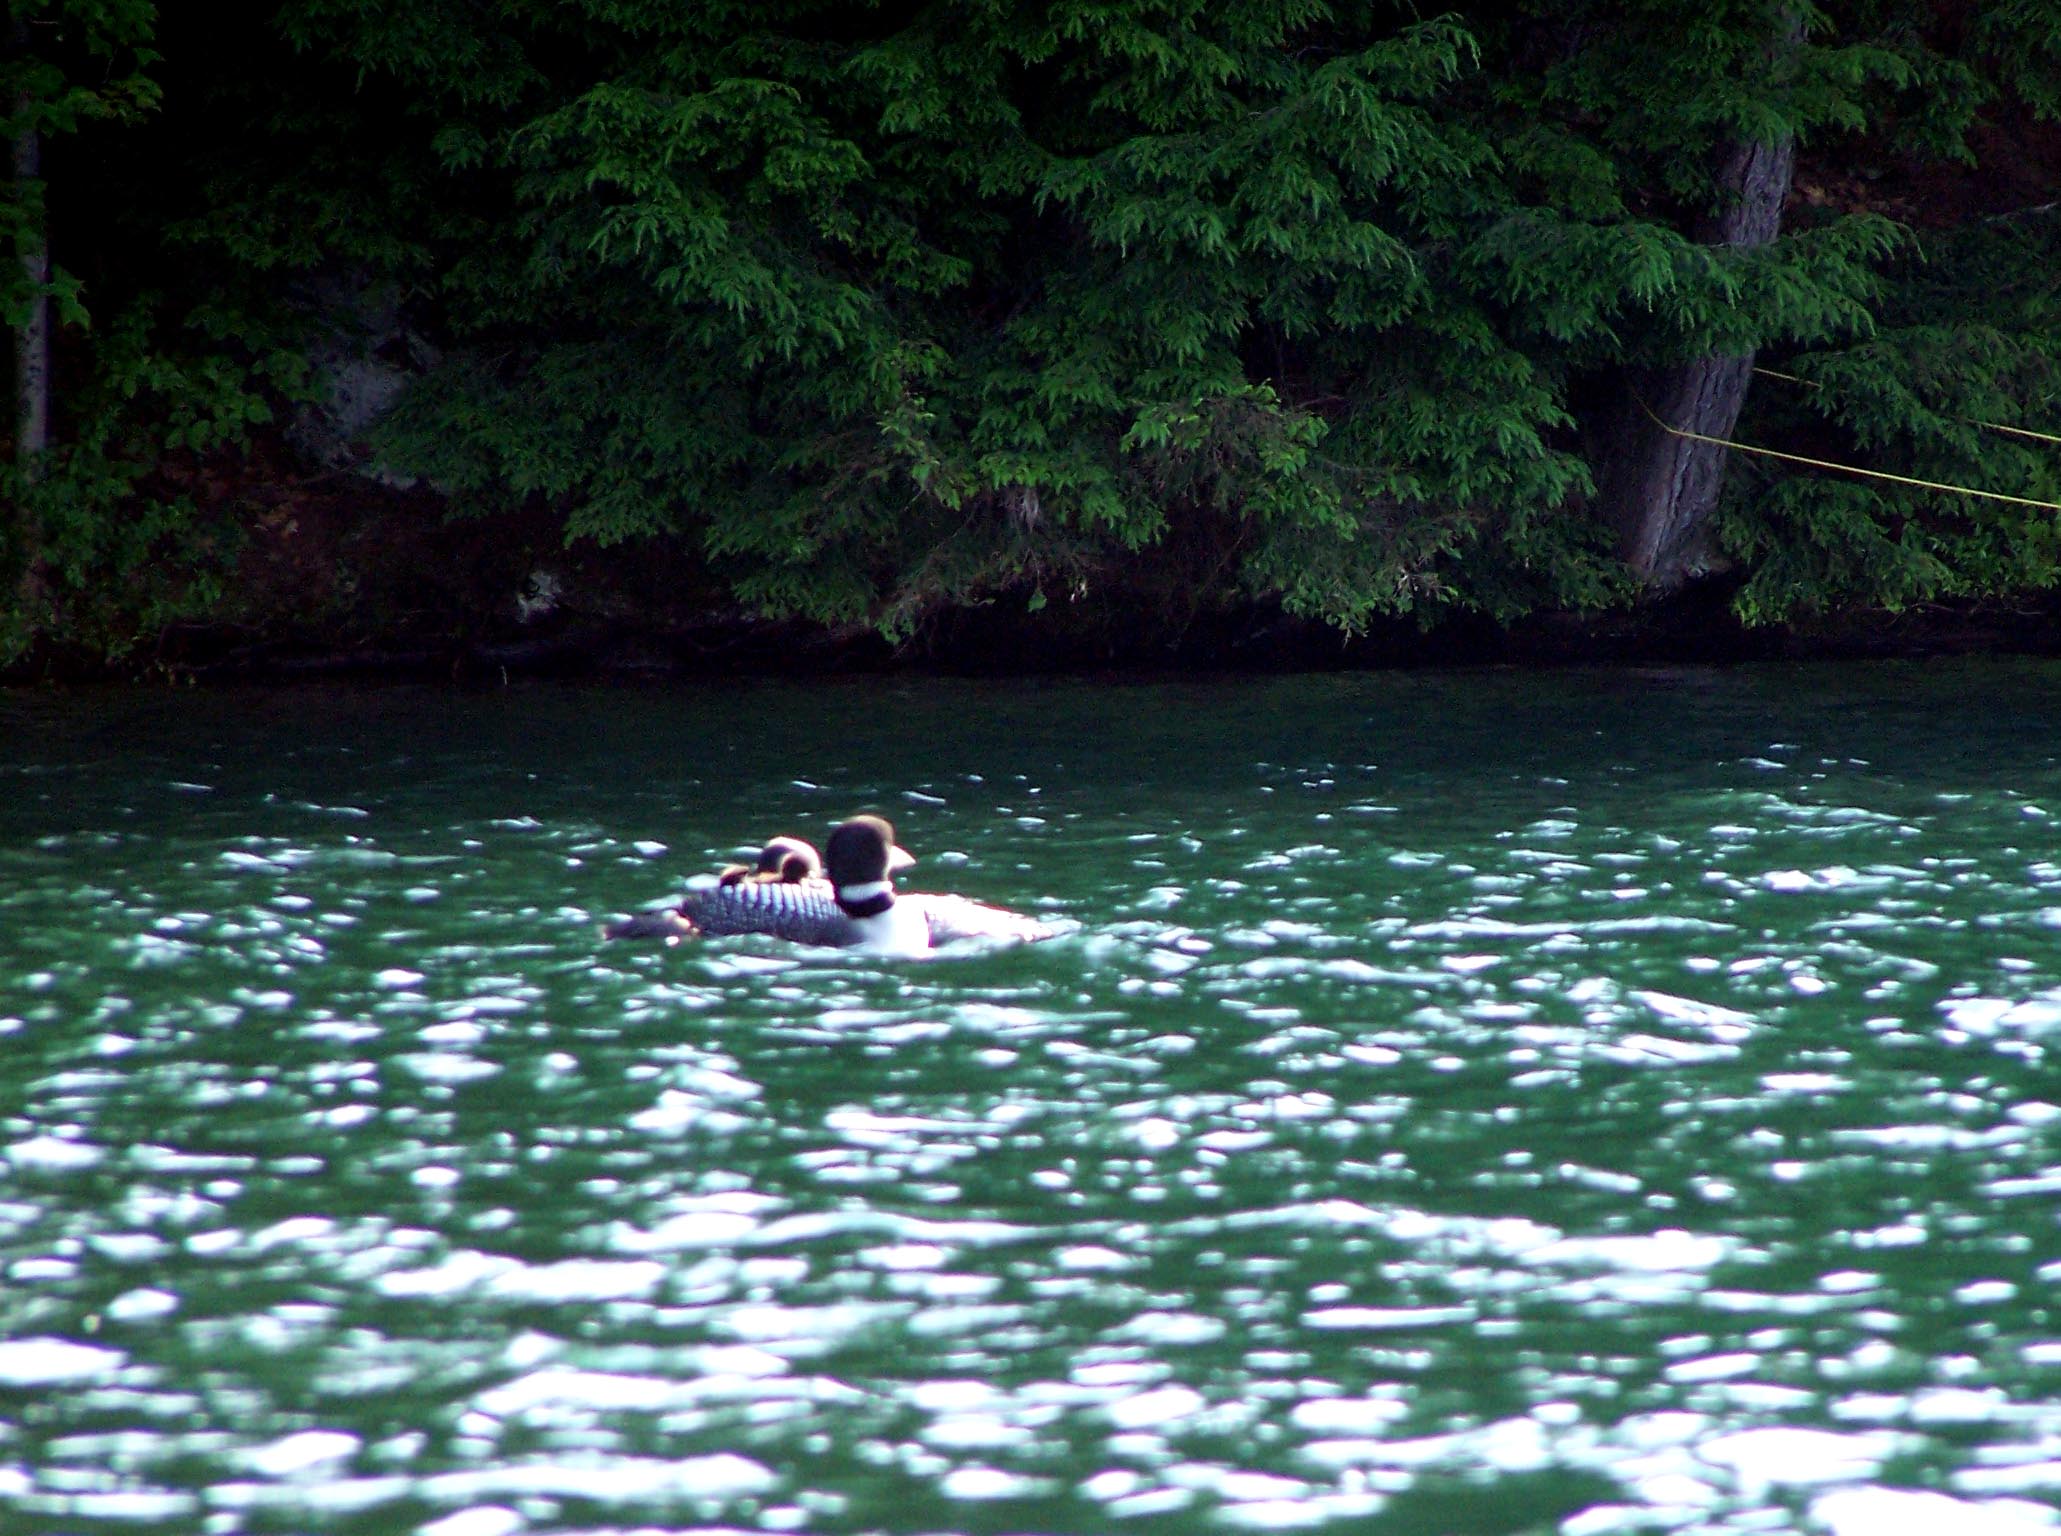 Loon with 2 babies on back